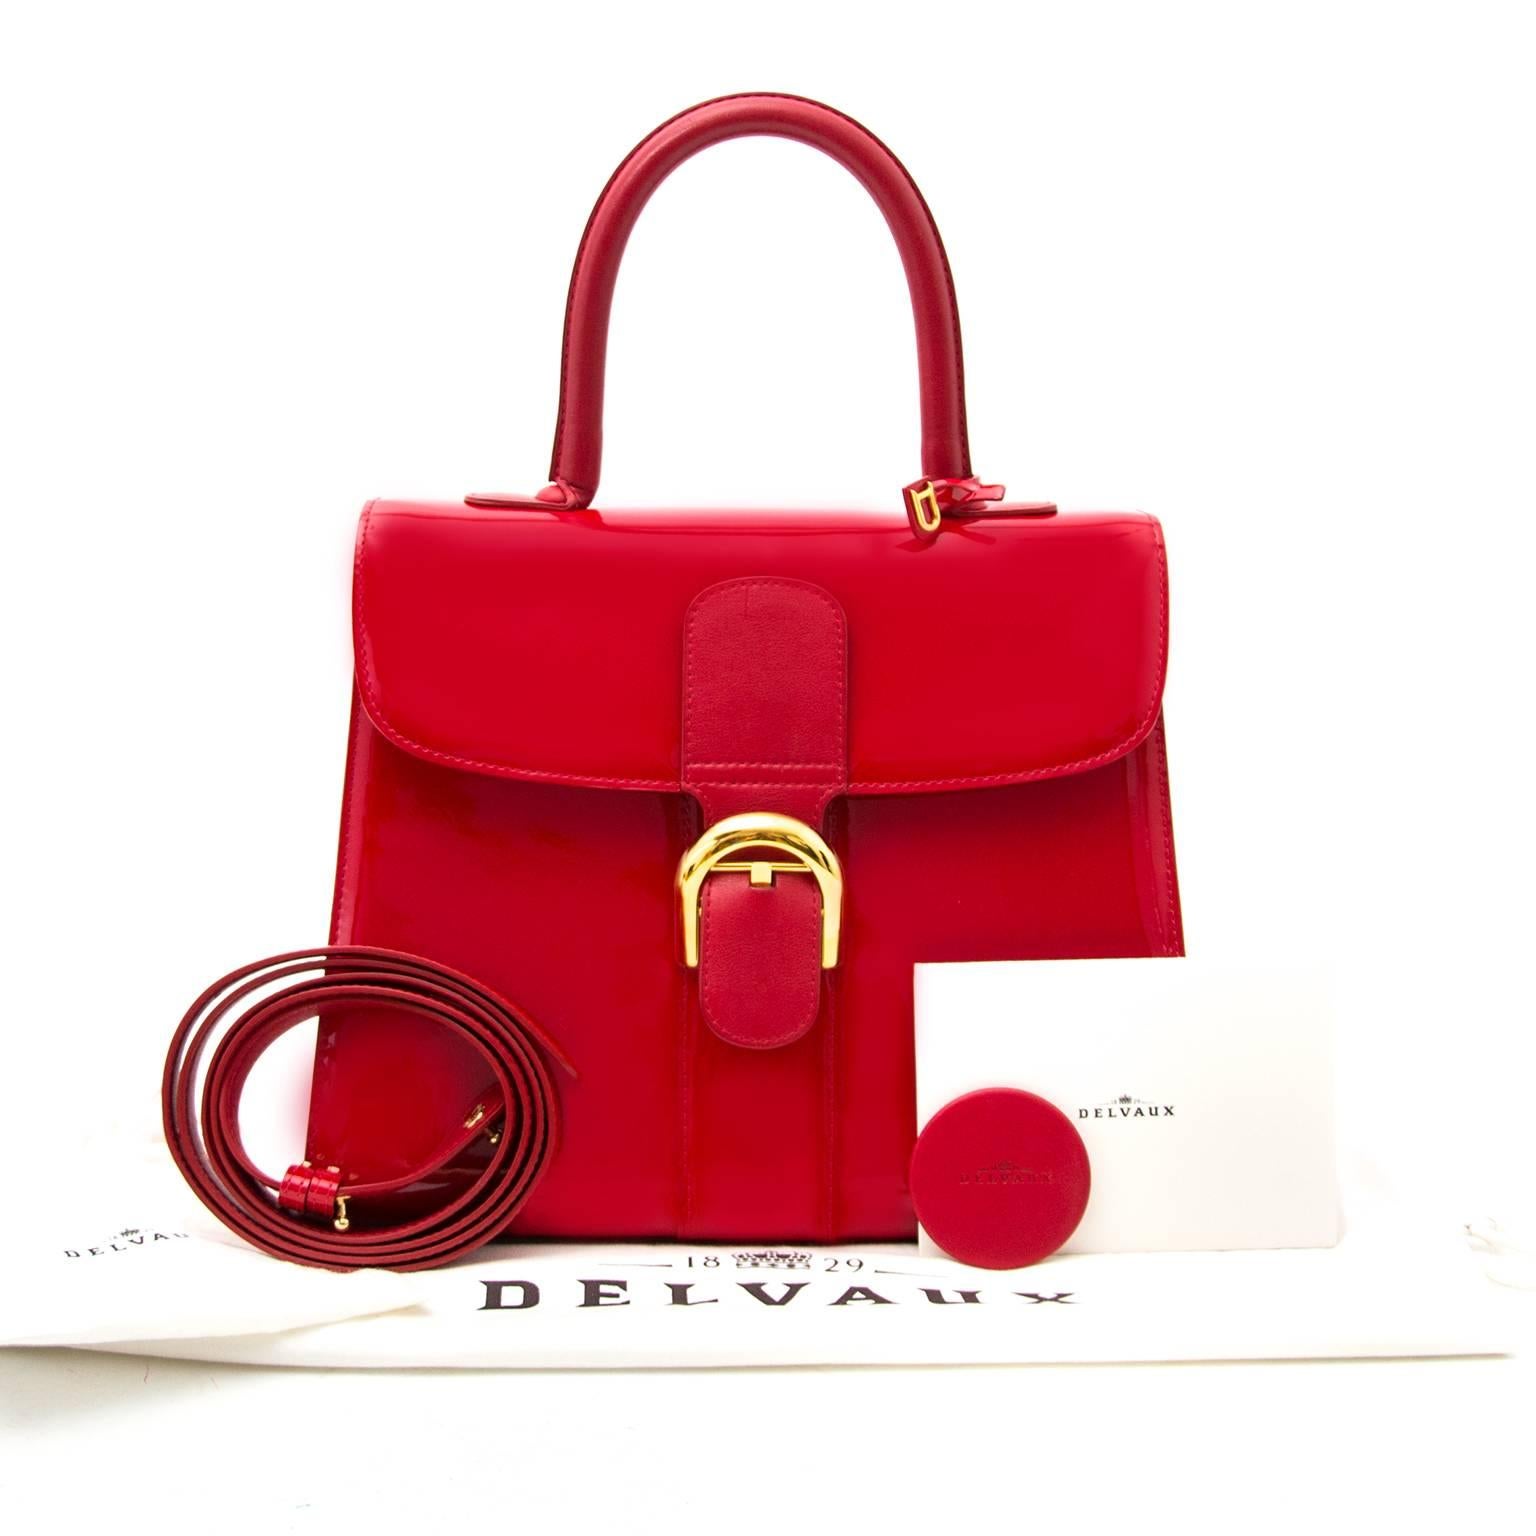 The Brillant, definitely a classic of all times. Designed in 1958 and stil on trend today. 
Crafted out of red patent leather with gold-tone details.
The Brillant comes in the medium size, perfect to wear on a daily base. 
Close this bag securely